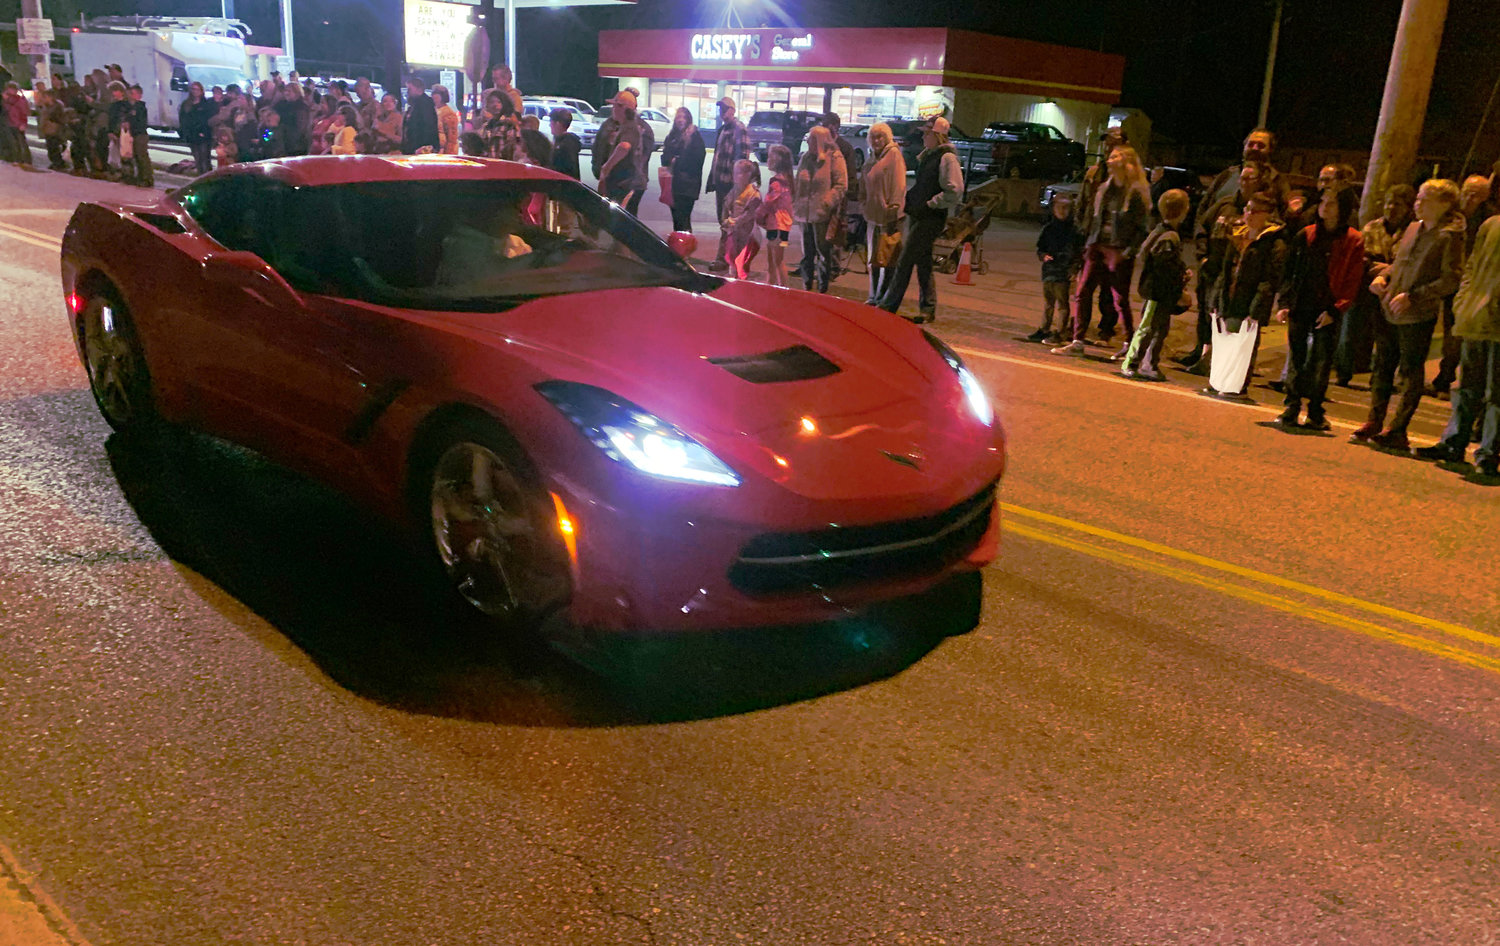 A LITTLE RED CORVETTE rolls east on Main Street in Sparta as people line the street to watch.